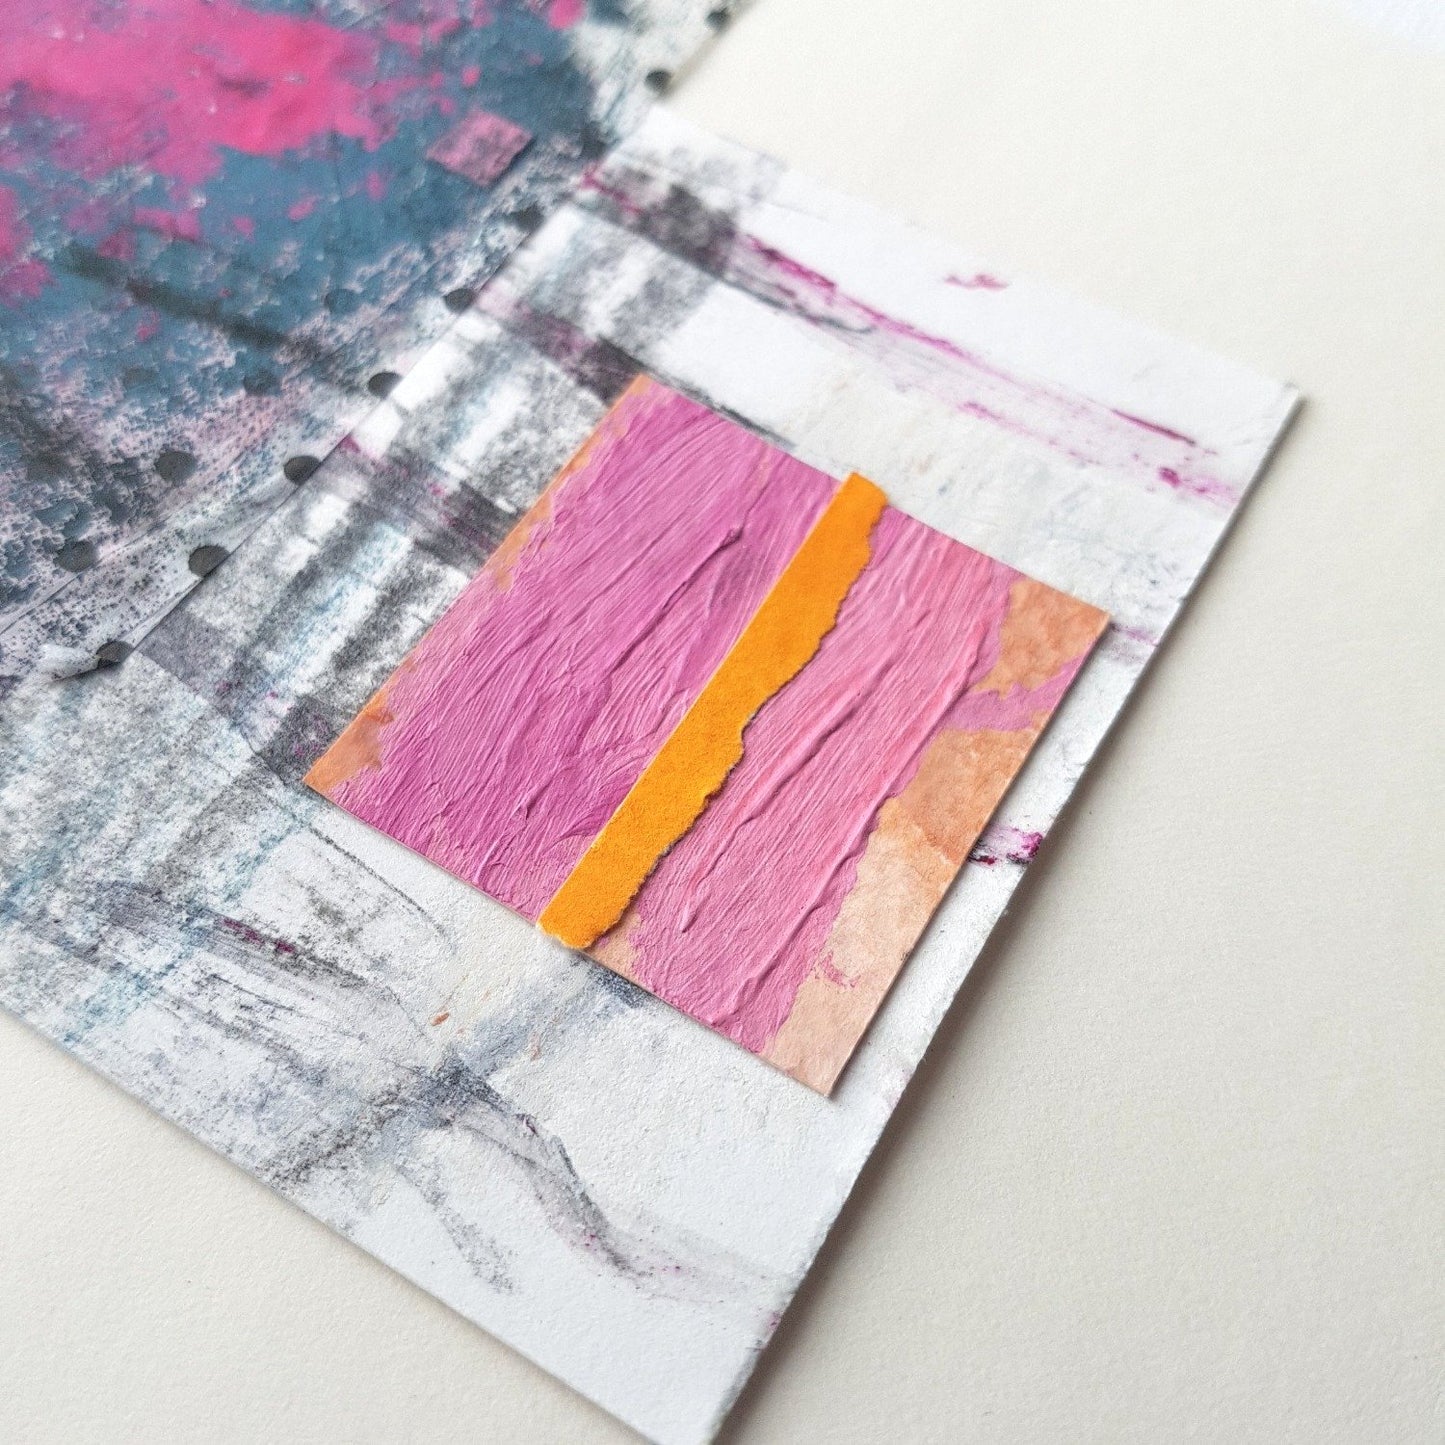 Close up of collage showing pink painted square and orange paper stripe.